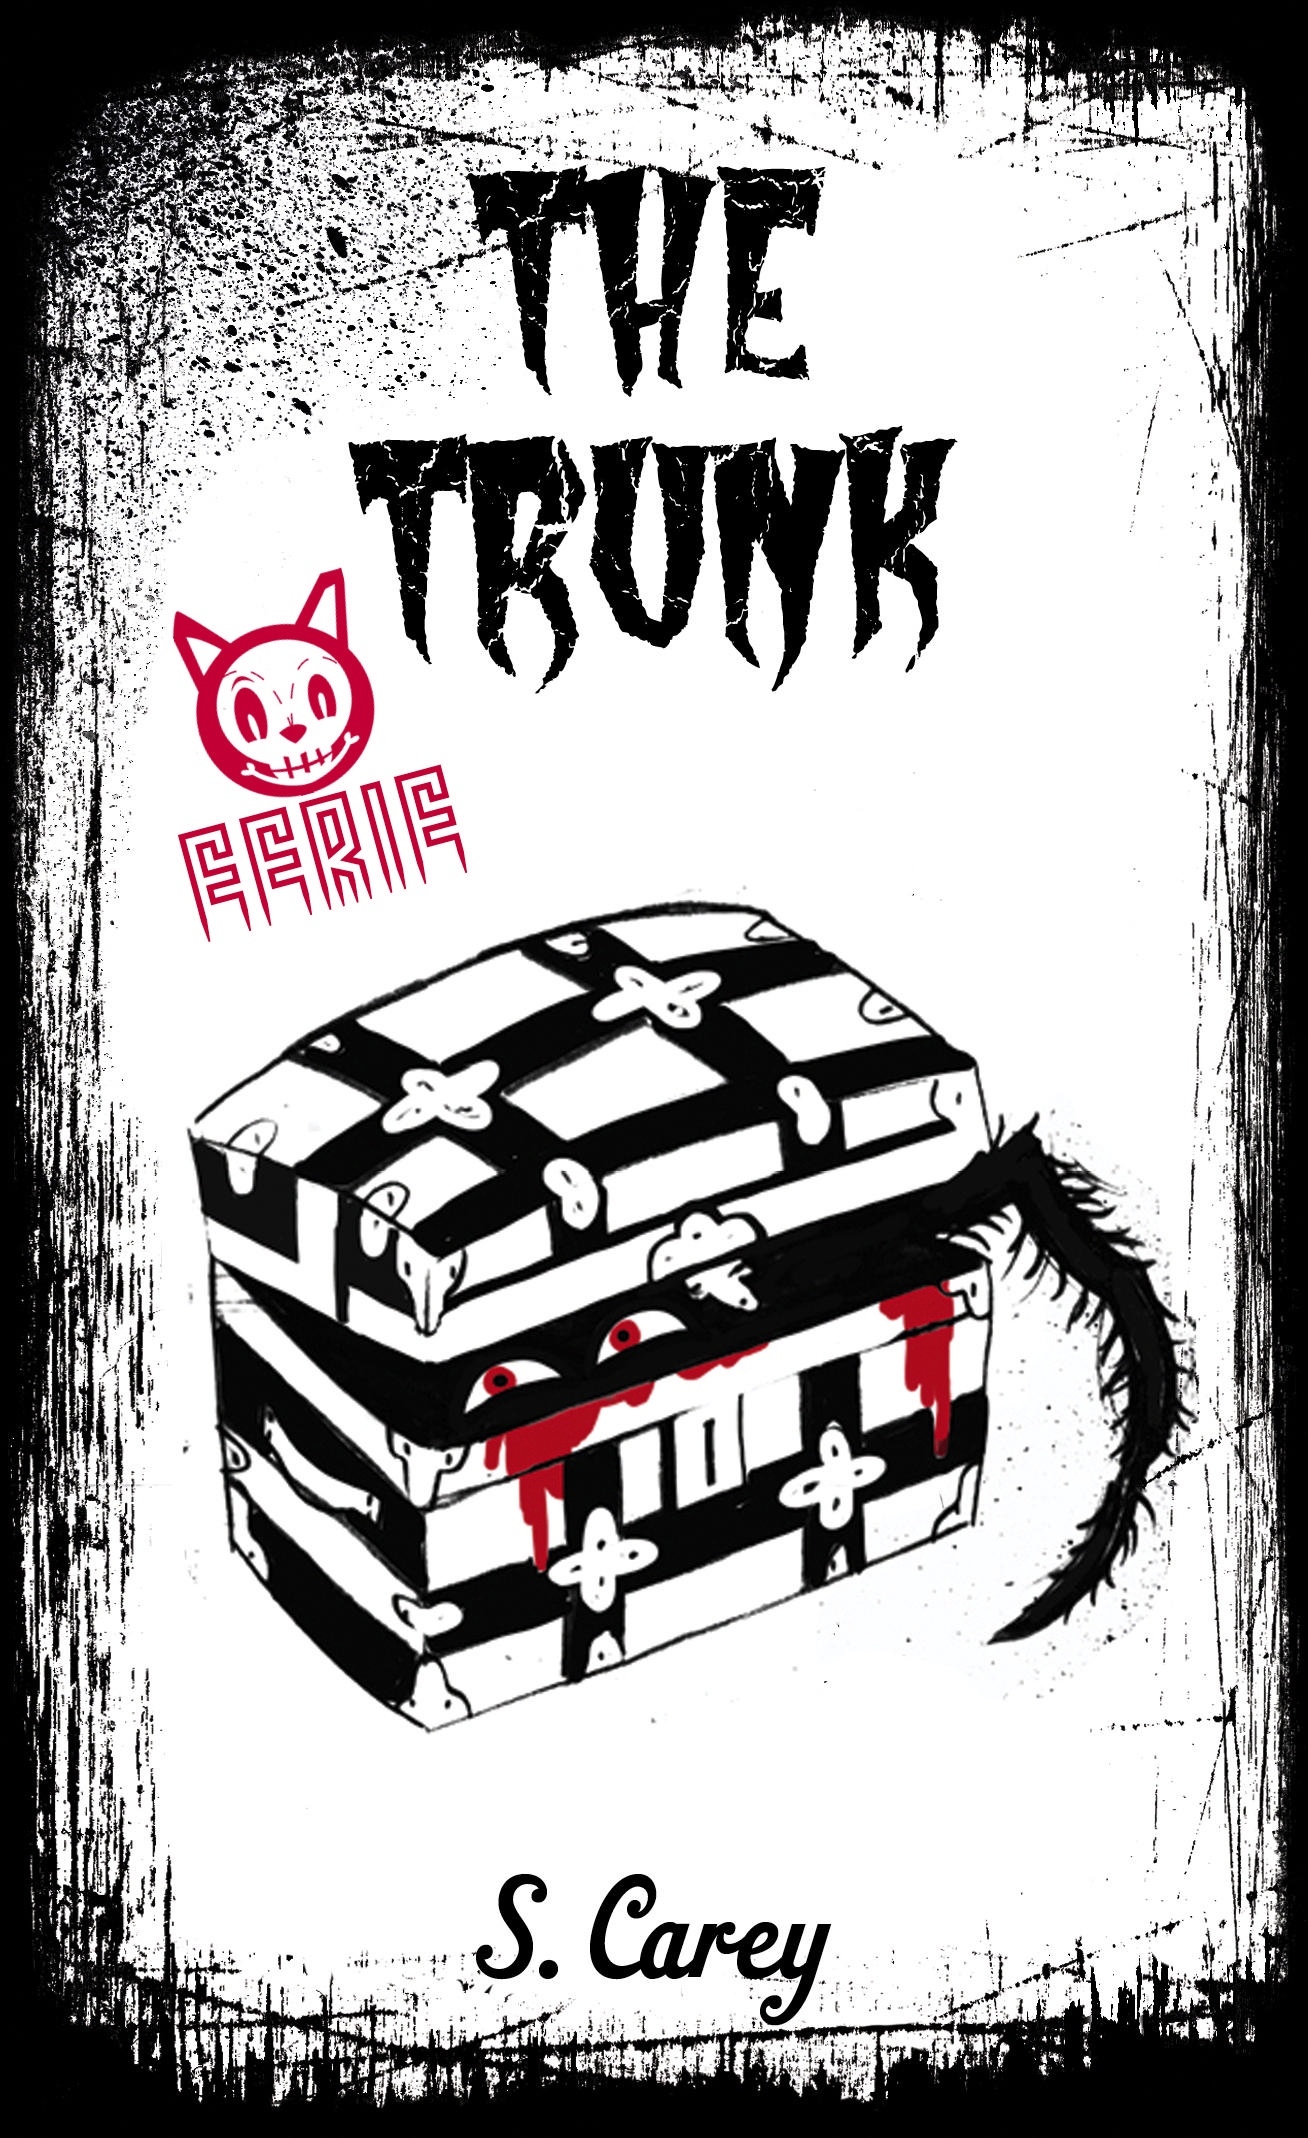 The Trunk